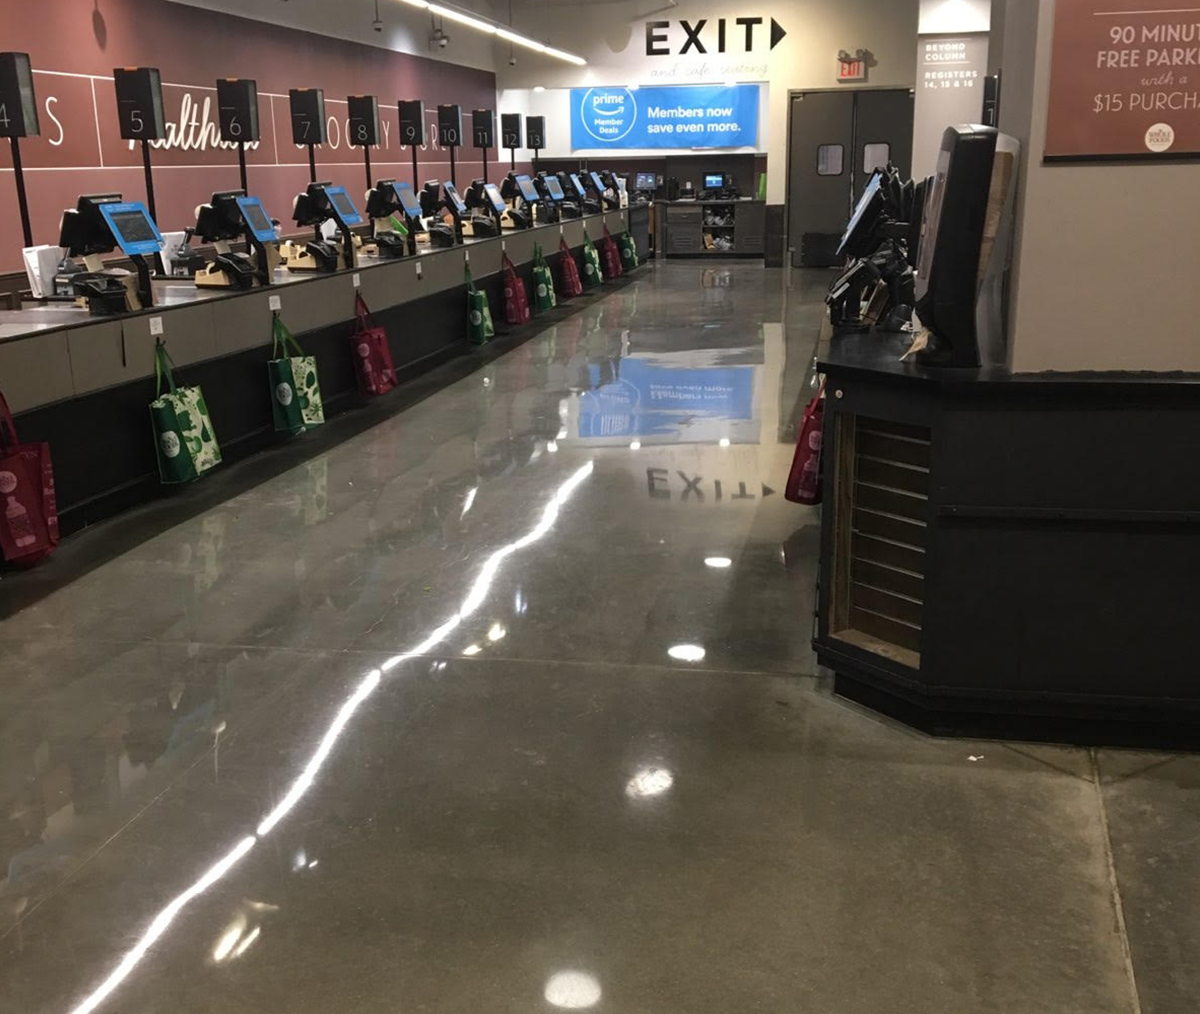 Commercial Cleaning And Maintenance